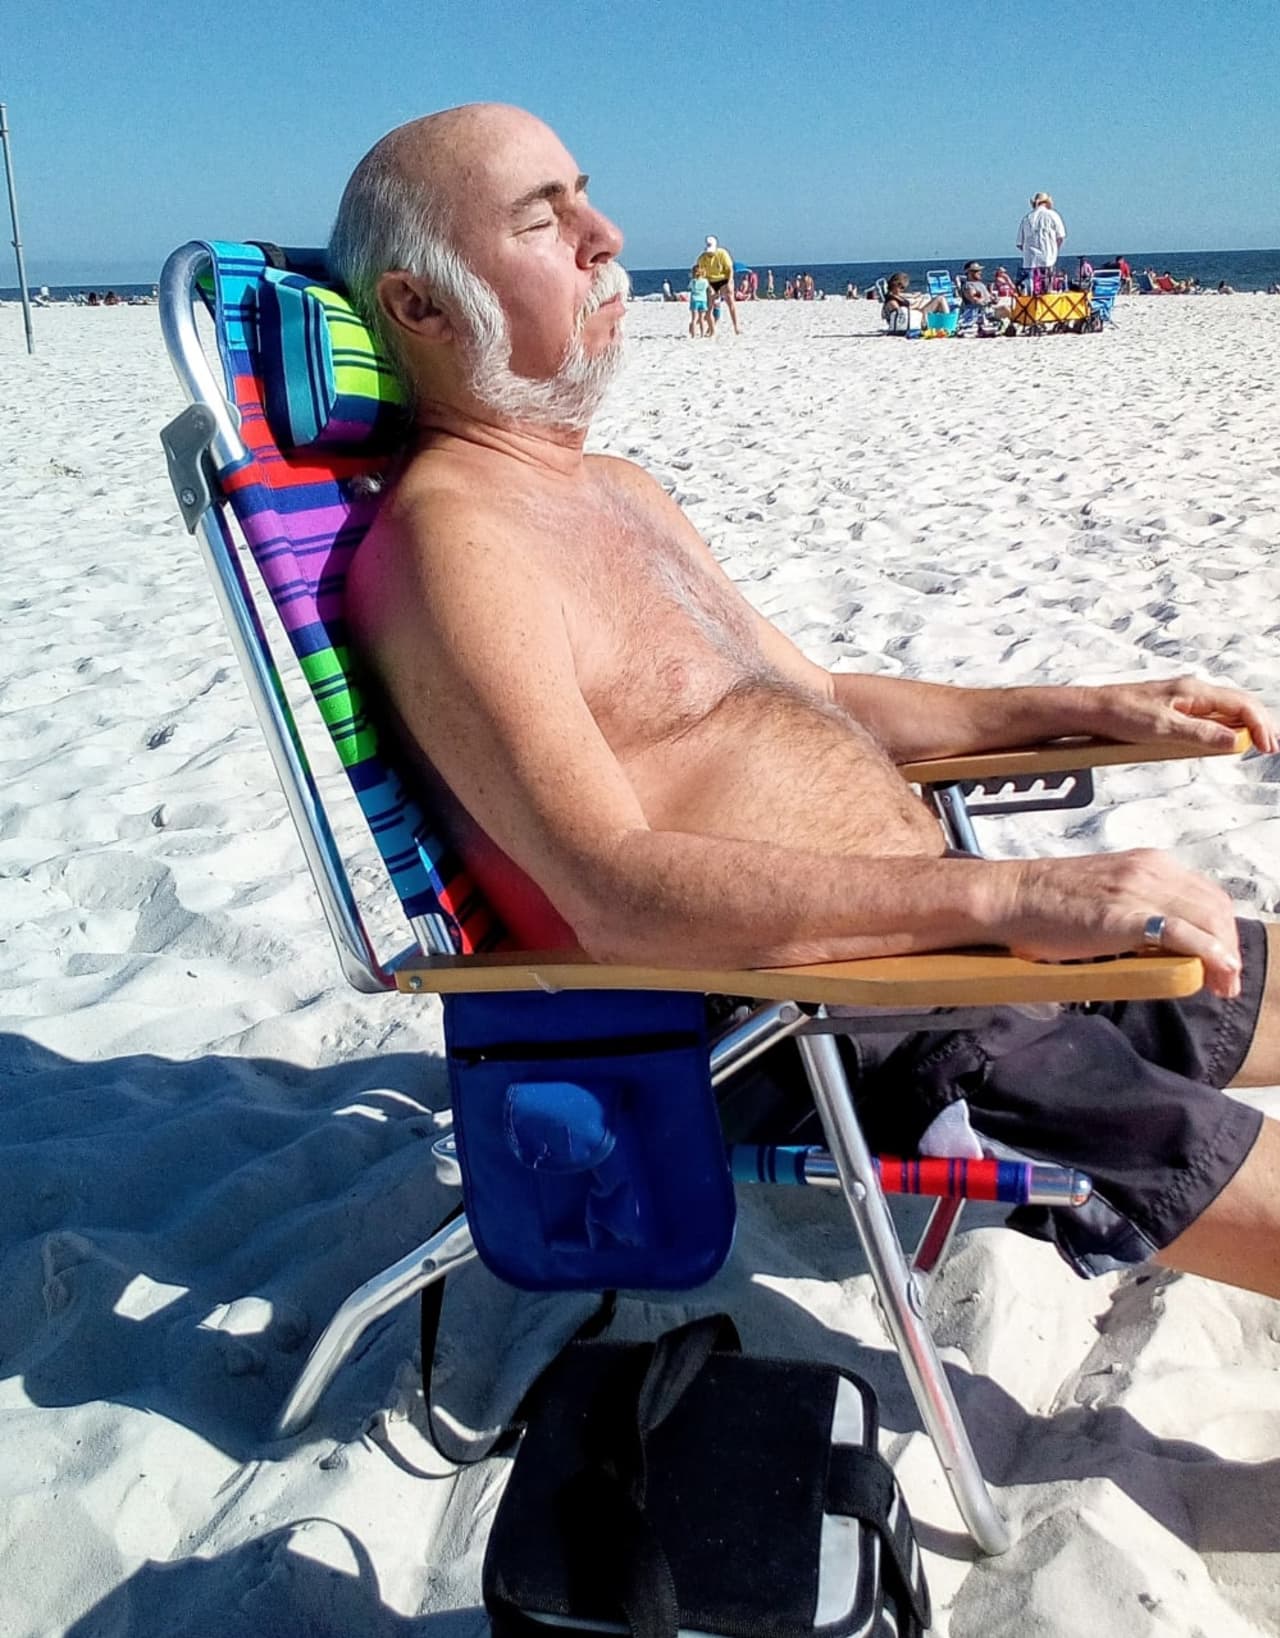 The beach was Billy Ferrante's happy place.